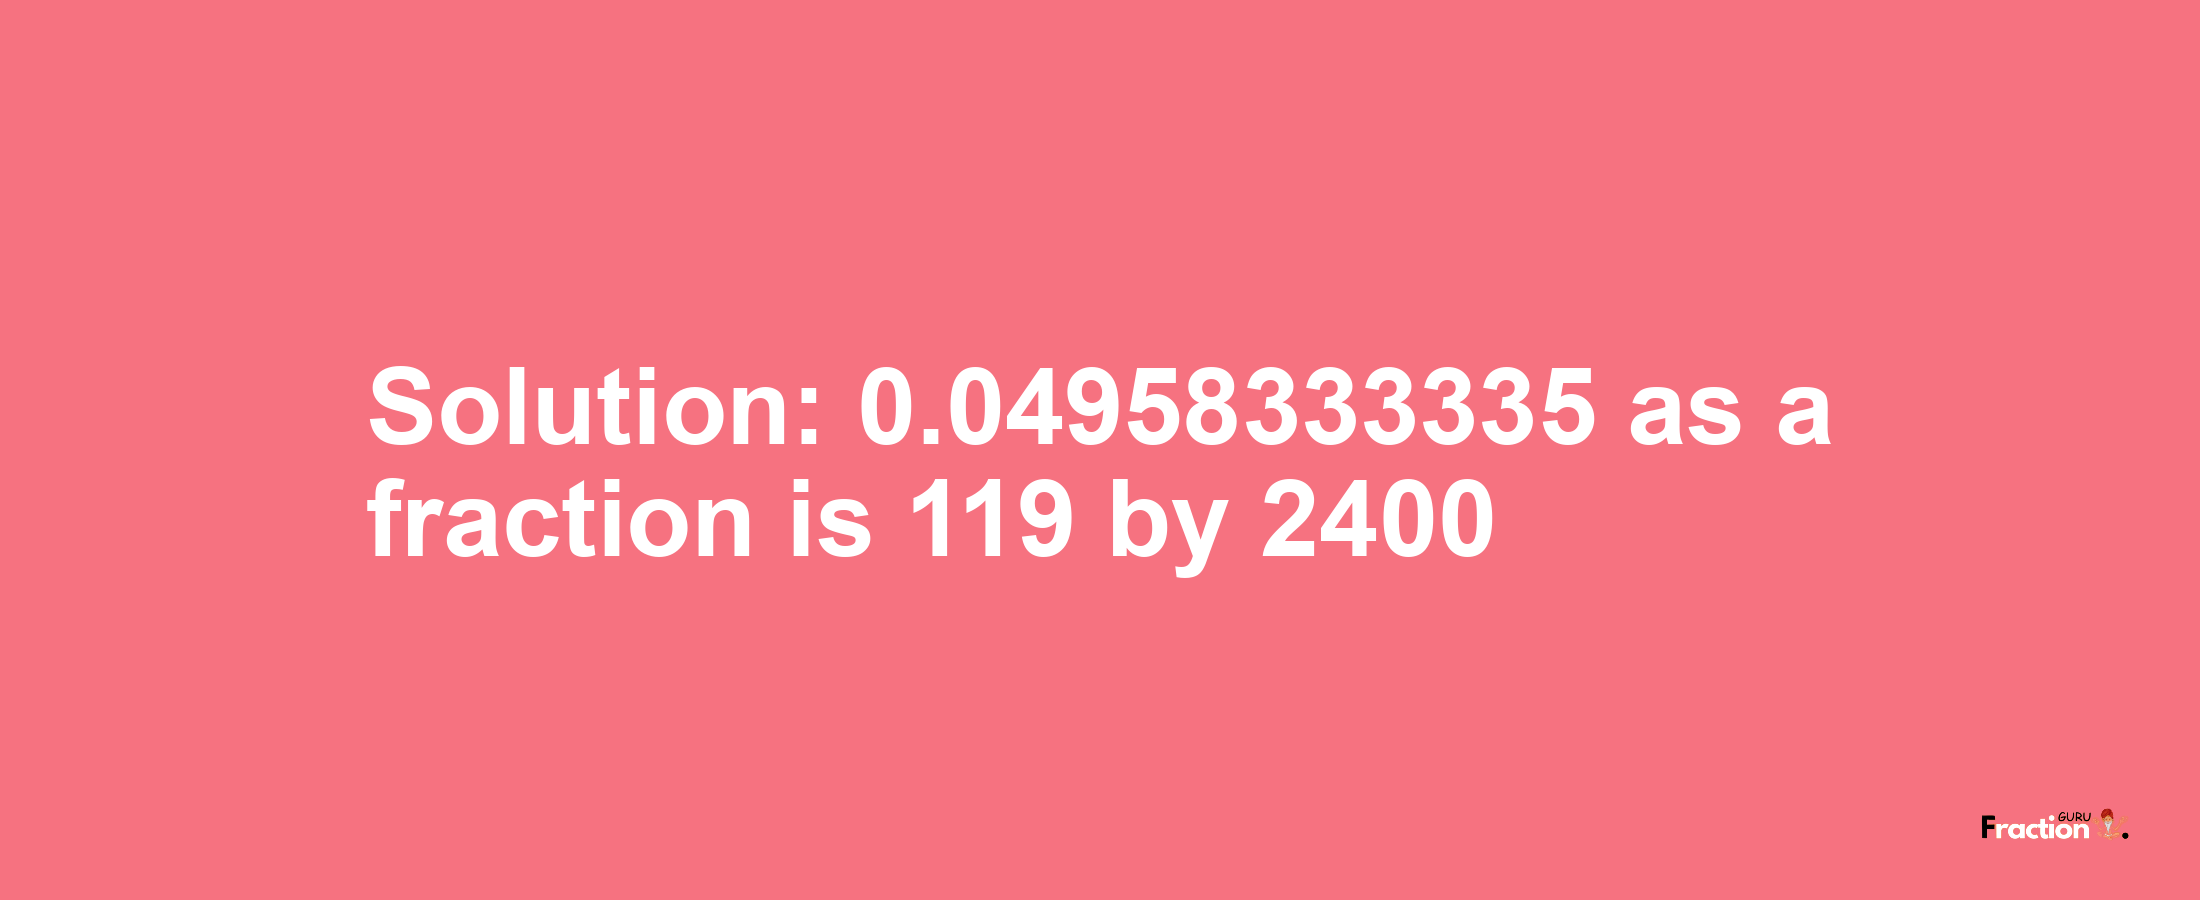 Solution:0.04958333335 as a fraction is 119/2400